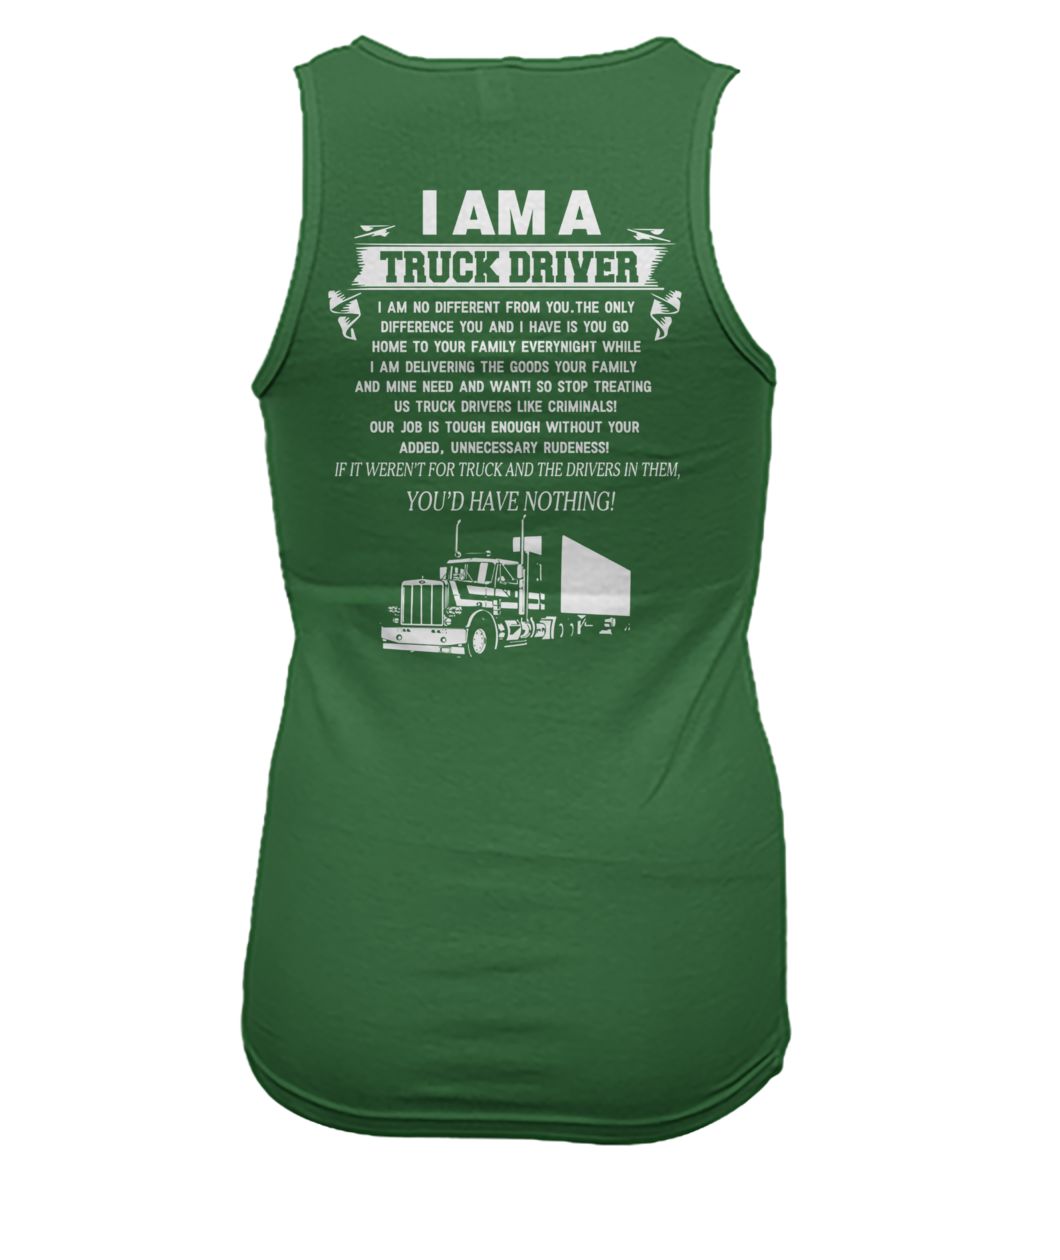 I am a truck driver I am no different from you the only difference you and I have is you go home to your family everynight women's tank top